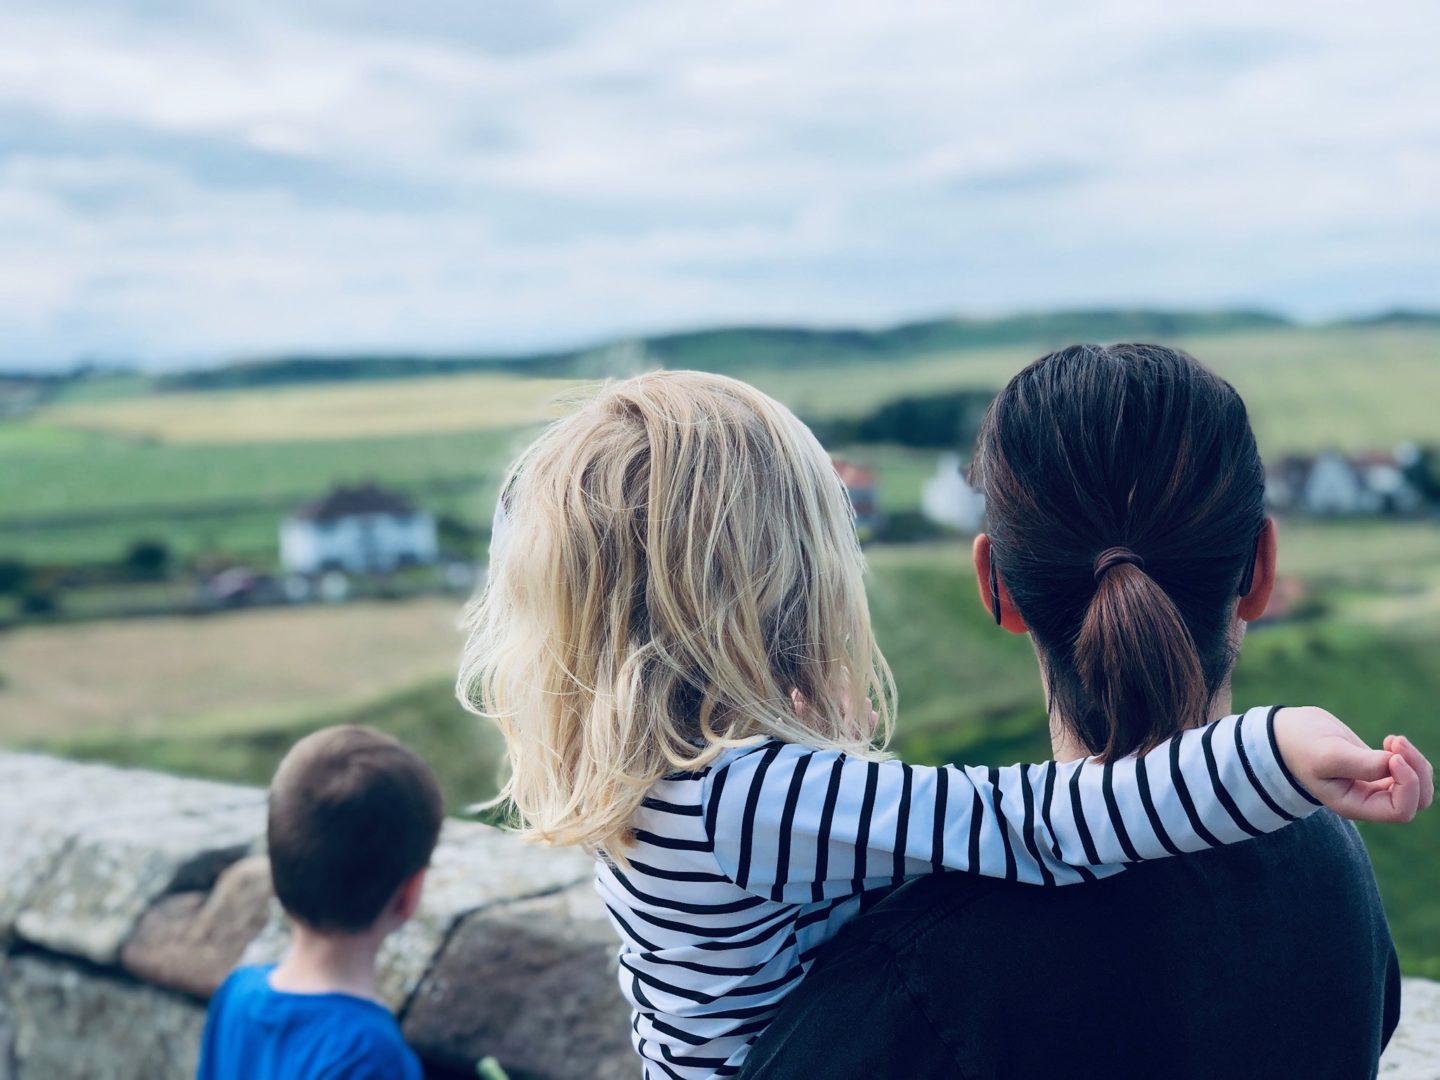 AD: A mini-break at the Northumberland Coast to visit Bamburgh Castle – where to stay and visit